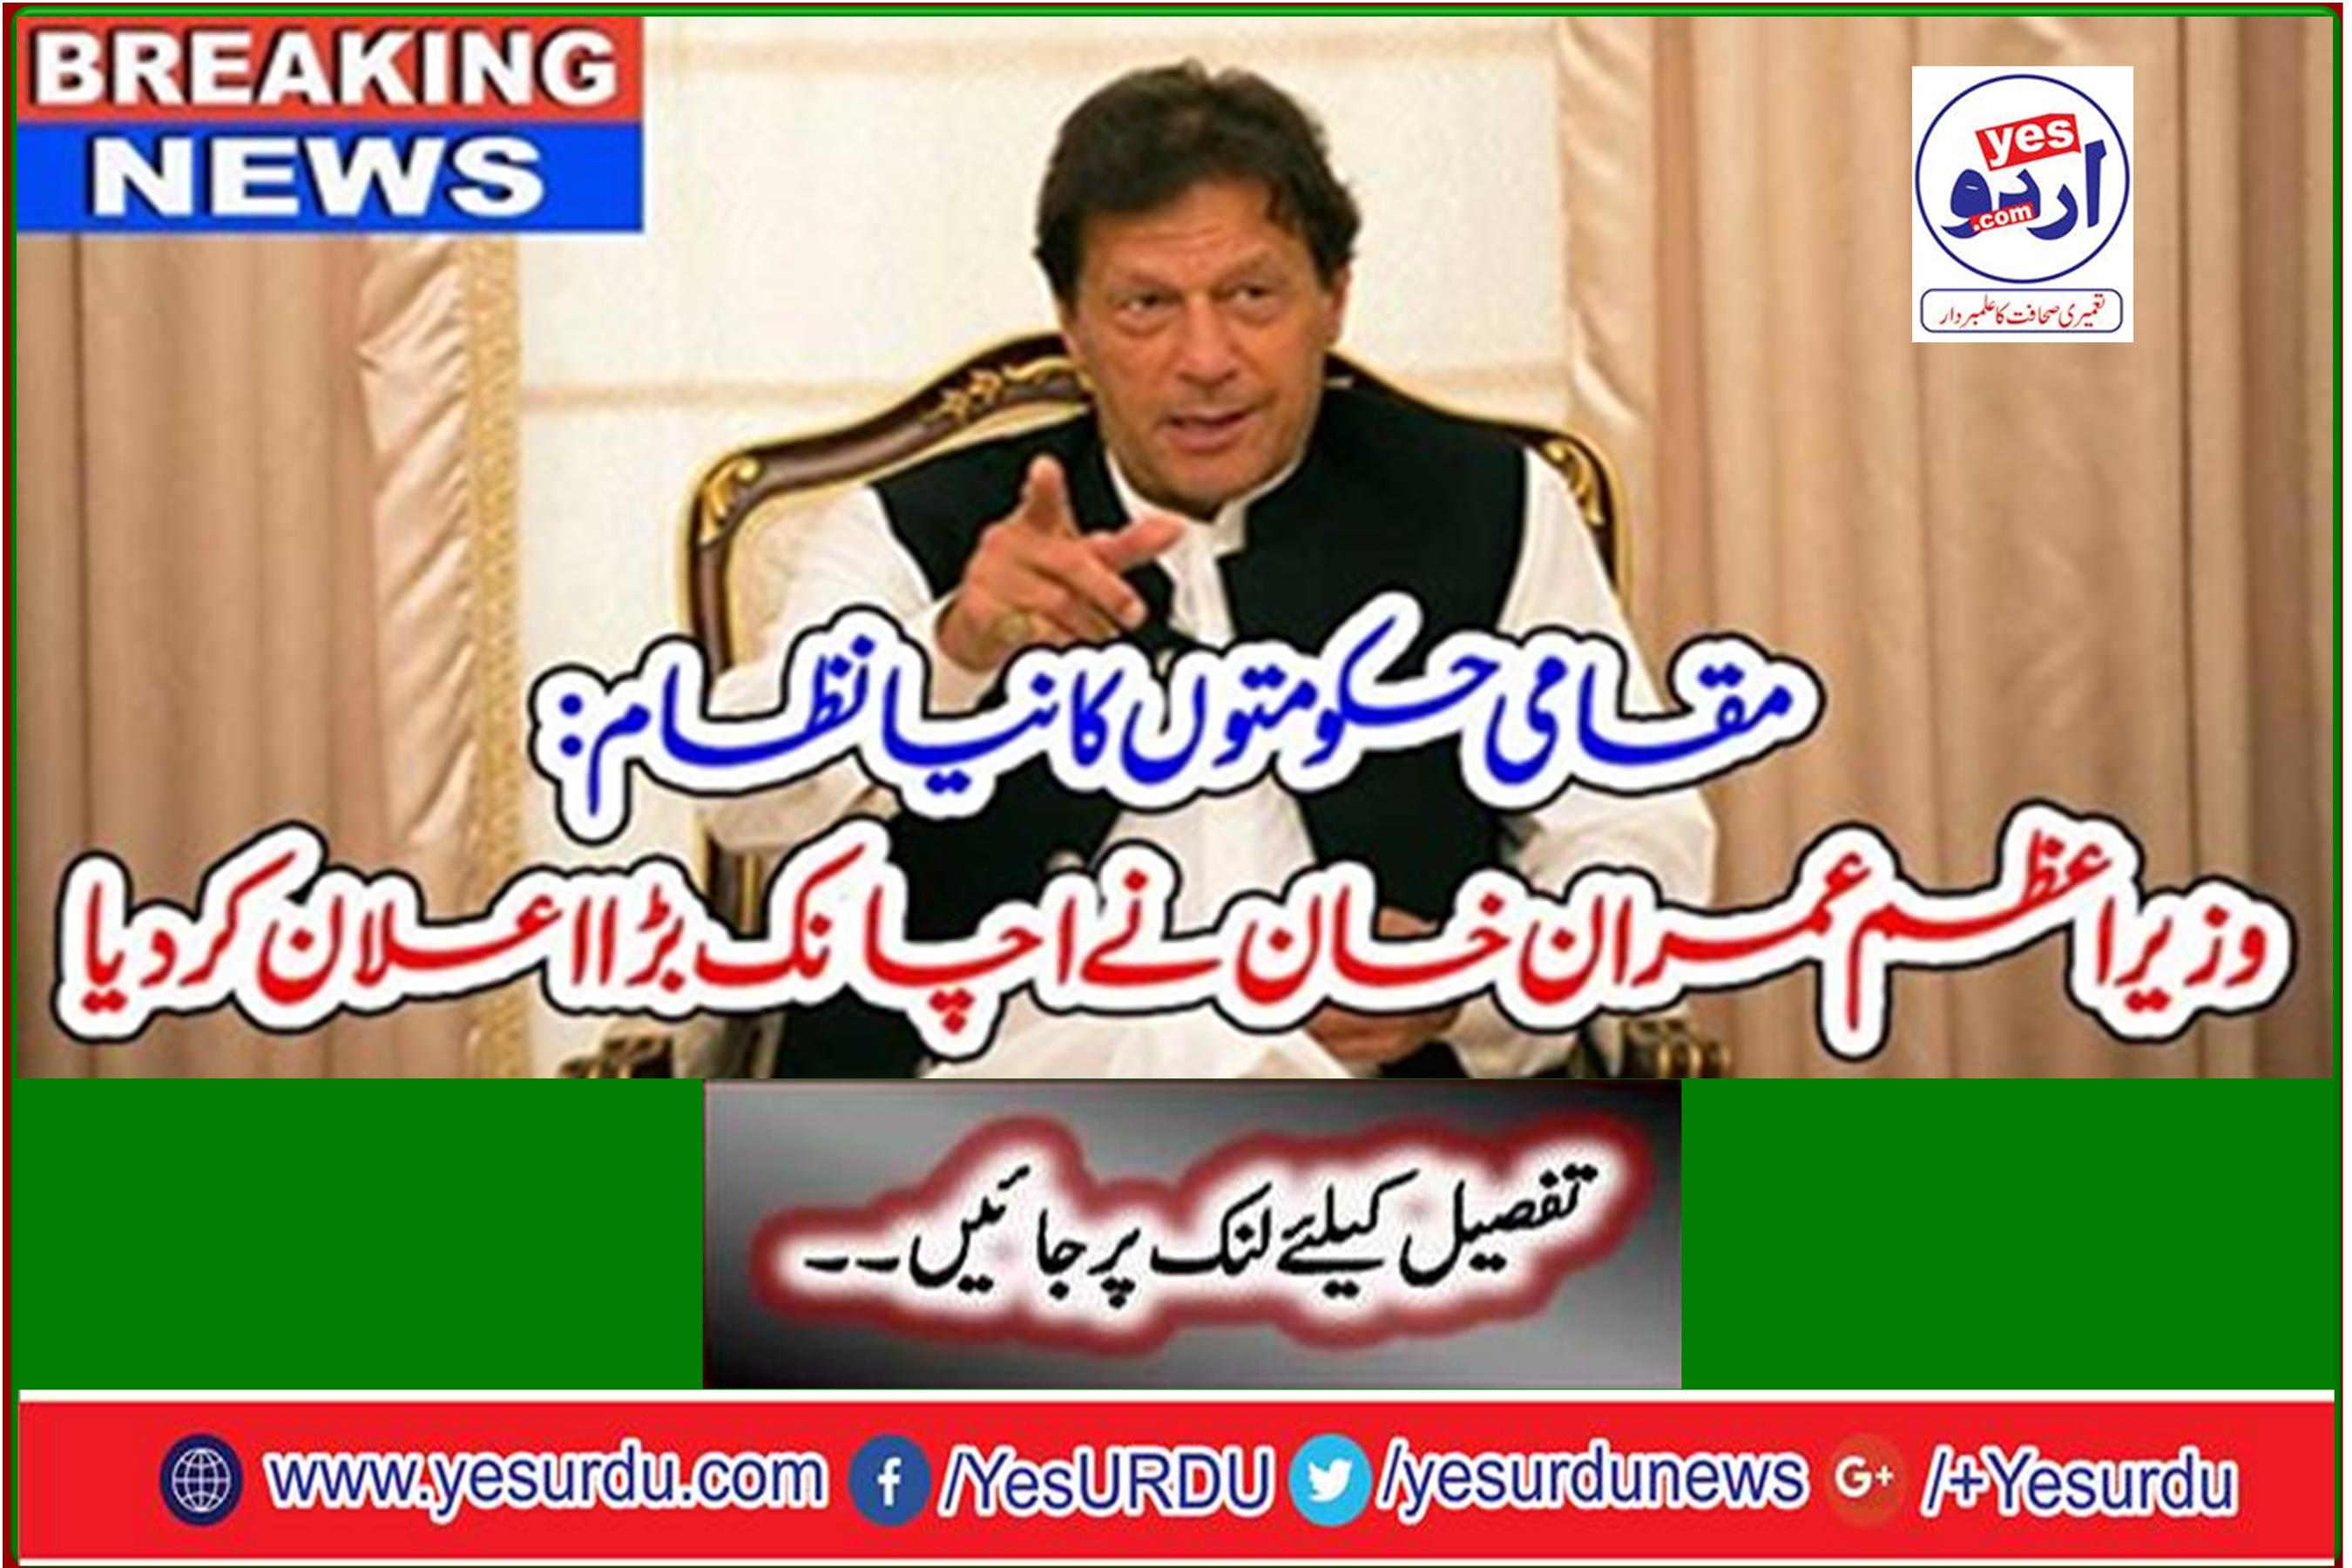 Breaking News: New system of local governments: PM Imran Khan announces big